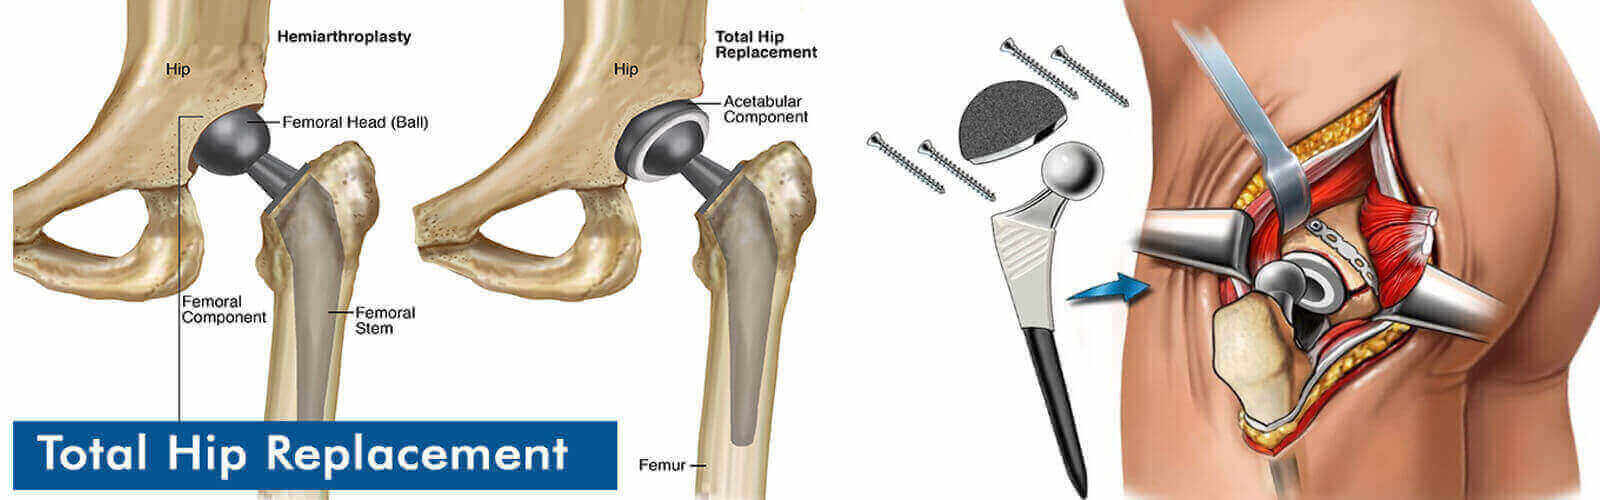 Hip Replacement Surgery Or Hip Resurfacing in Qatar